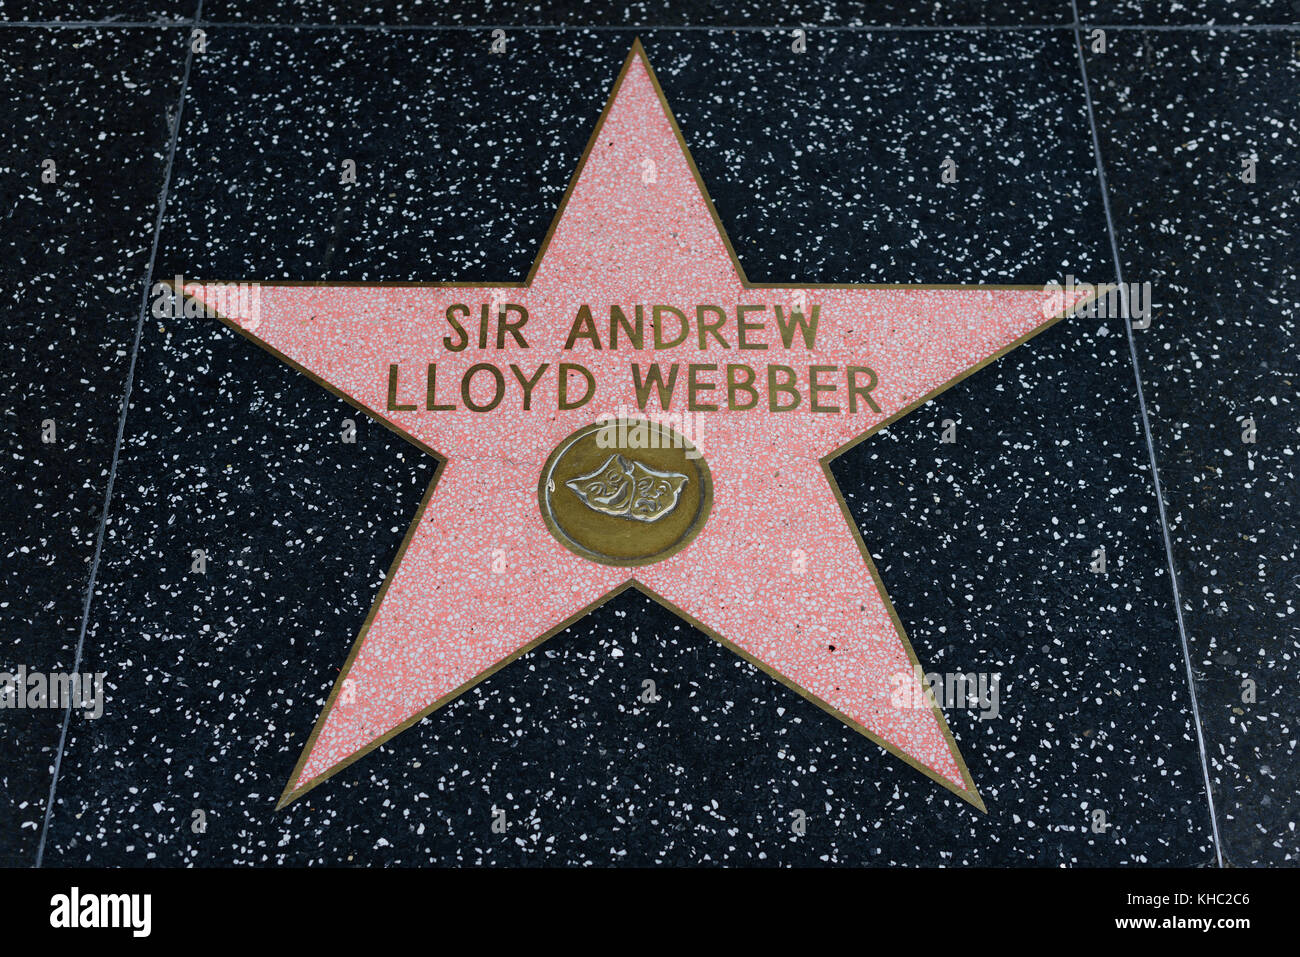 HOLLYWOOD, CA - DECEMBER 06: Sir Andrew Lloyd Webber star on the Hollywood Walk of Fame in Hollywood, California on Dec. 6, 2016. Stock Photo